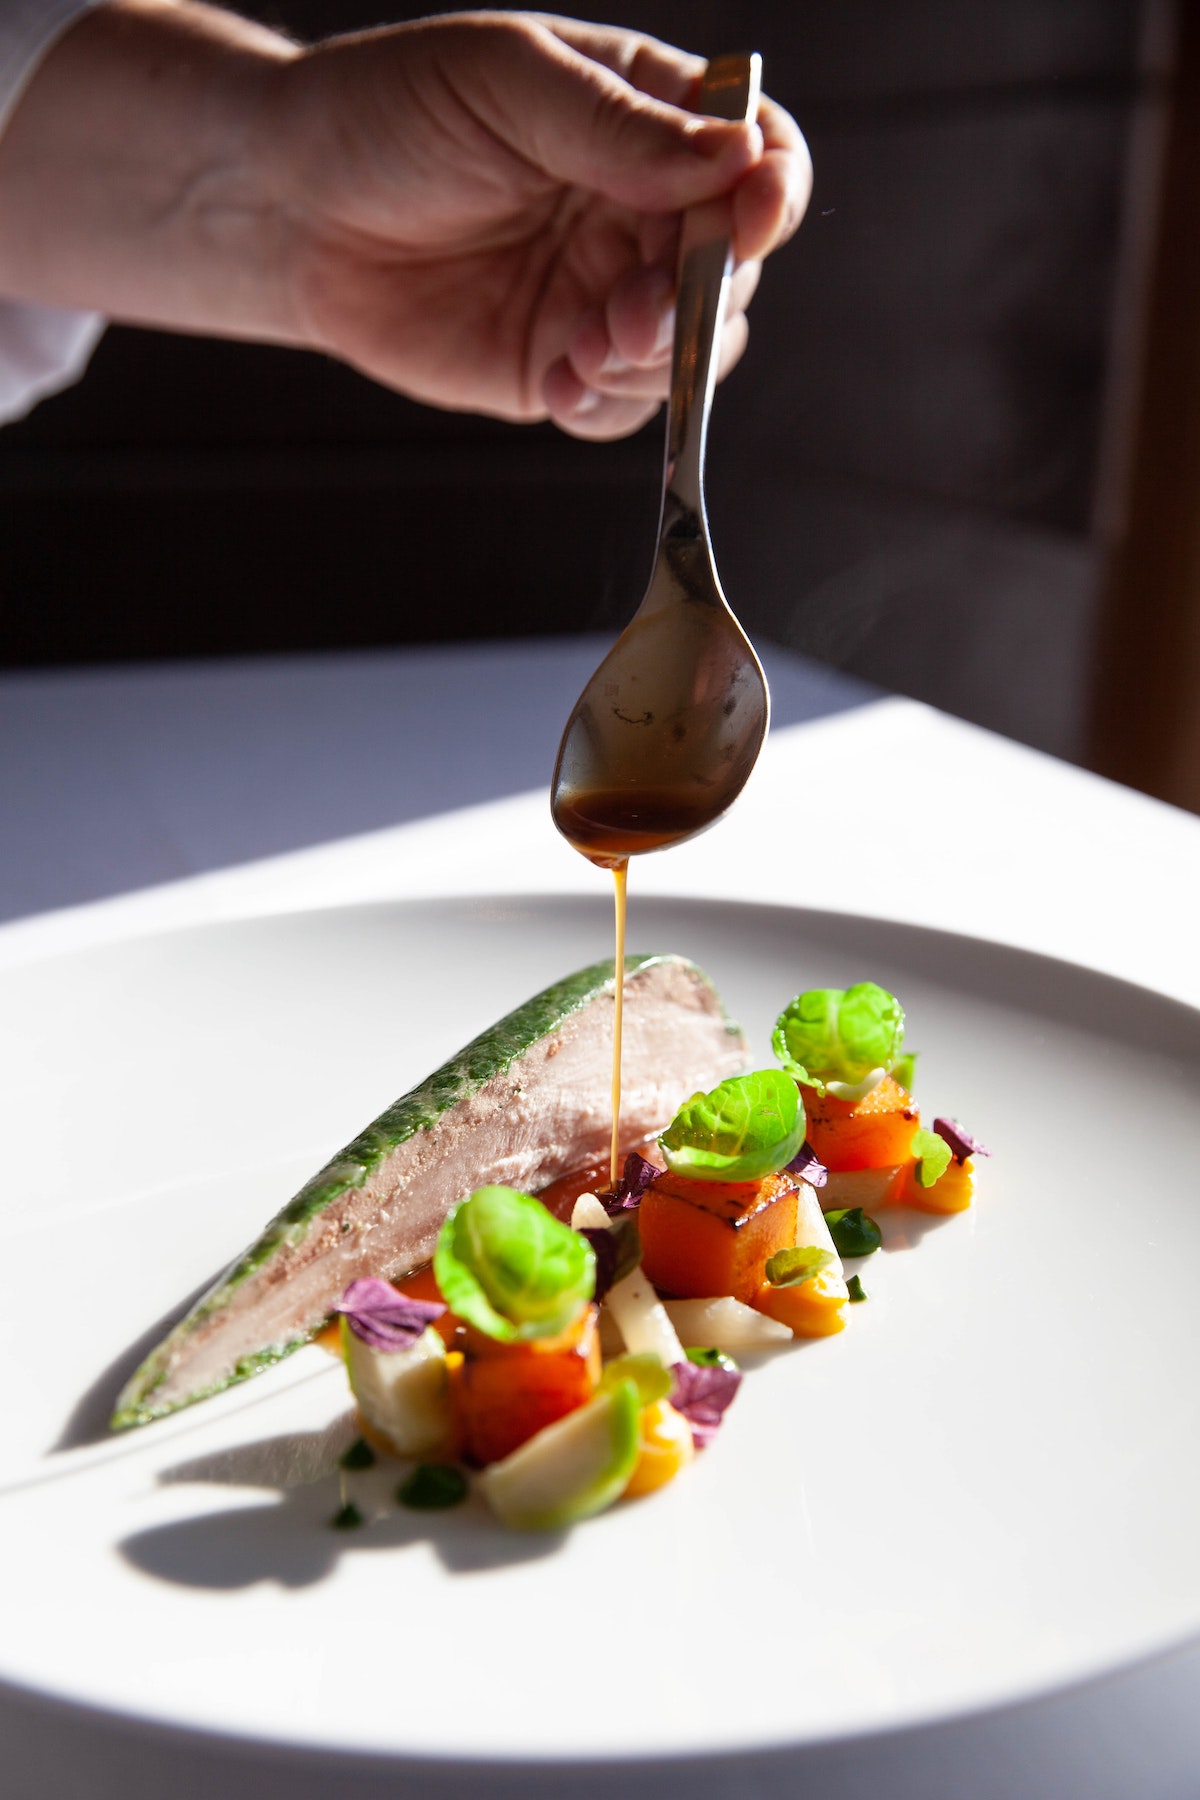 Sauce being spooned over artfully presented fish and vegetables on a white plate